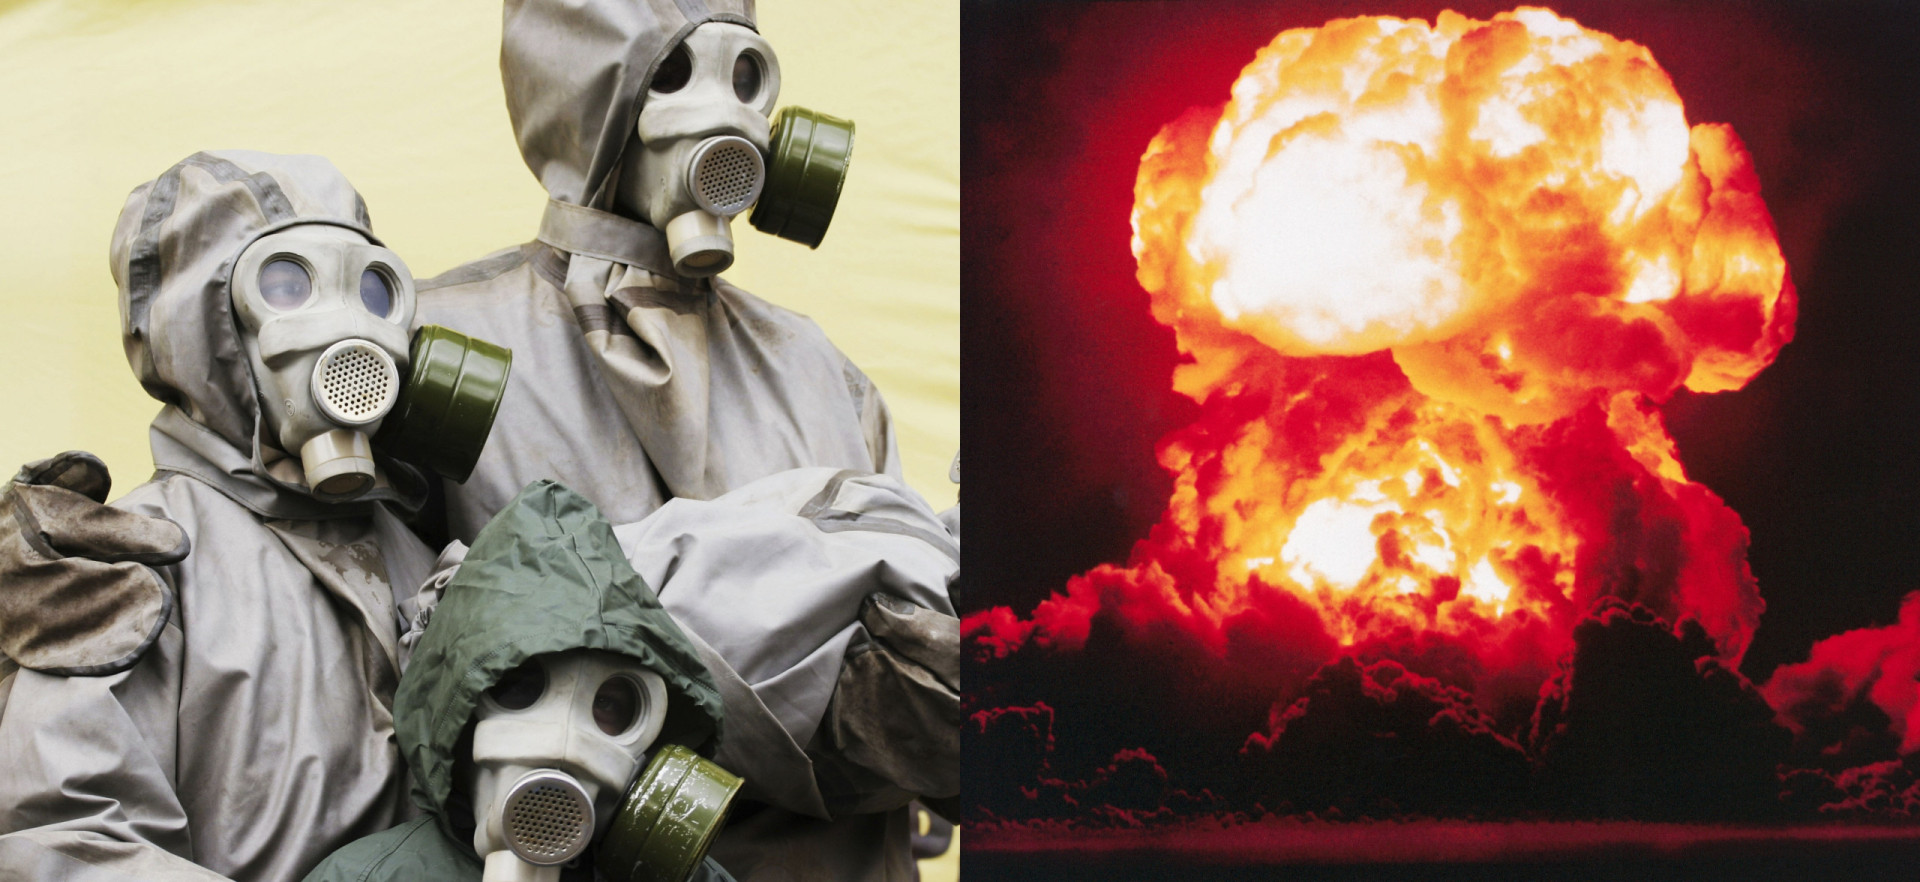 <p>The Doomsday Clock continues to inch closer to the apocalypse over climate change and fears of nuclear war. The year 2024 has brought yet another dire warning issued by the Bulletin of the Atomic Scientists. But what is the Doomsday Clock, and how is it read?</p> <p>To summarize, the clock was developed by scientists in 1947 to track the likelihood of mankind doing something that brings about the end of the world. The development of nuclear weapons and the rapid progression of climate change are two things that have moved the clock's hand closer to midnight, which in this case, marks Armageddon. After the end of the Cold War, the clock was 17 minutes away from midnight, but in recent years, we've gone from counting down the minutes to counting down the seconds. In 2024, the Bulletin left the clock at the same position as last year—90 seconds to midnight.</p> <p>"Conflict hot spots around the world carry the threat of nuclear escalation, climate change is already causing death and destruction, and disruptive technologies like AI and biological research advance faster than their safeguards," Rachel Bronson, the Bulletin's president and CEO, told Reuters. She clarified that leaving the clock unchanged is "not an indication that the world is stable," considering how disastrously close we already are to midnight. </p> <p>Click through the gallery to learn more about the Doomsday Clock and how we've come so close to the end of the world. </p><p>You may also like:<a href="https://www.starsinsider.com/n/187642?utm_source=msn.com&utm_medium=display&utm_campaign=referral_description&utm_content=490923v3en-au"> The craziest daredevils to go over the Niagara Falls</a></p>